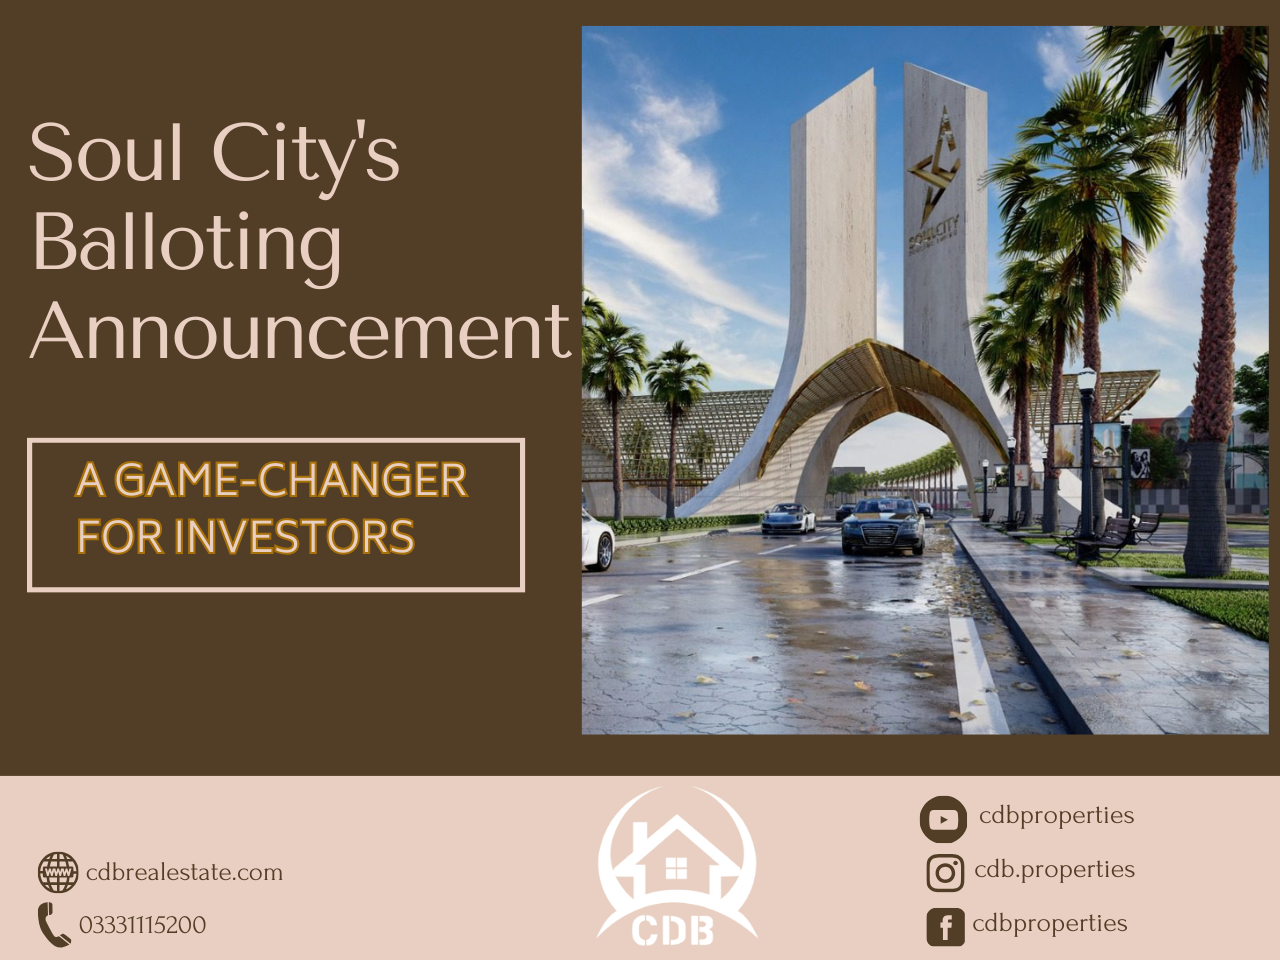 Soul City's Balloting Announcement: A Game-Changer for Investors